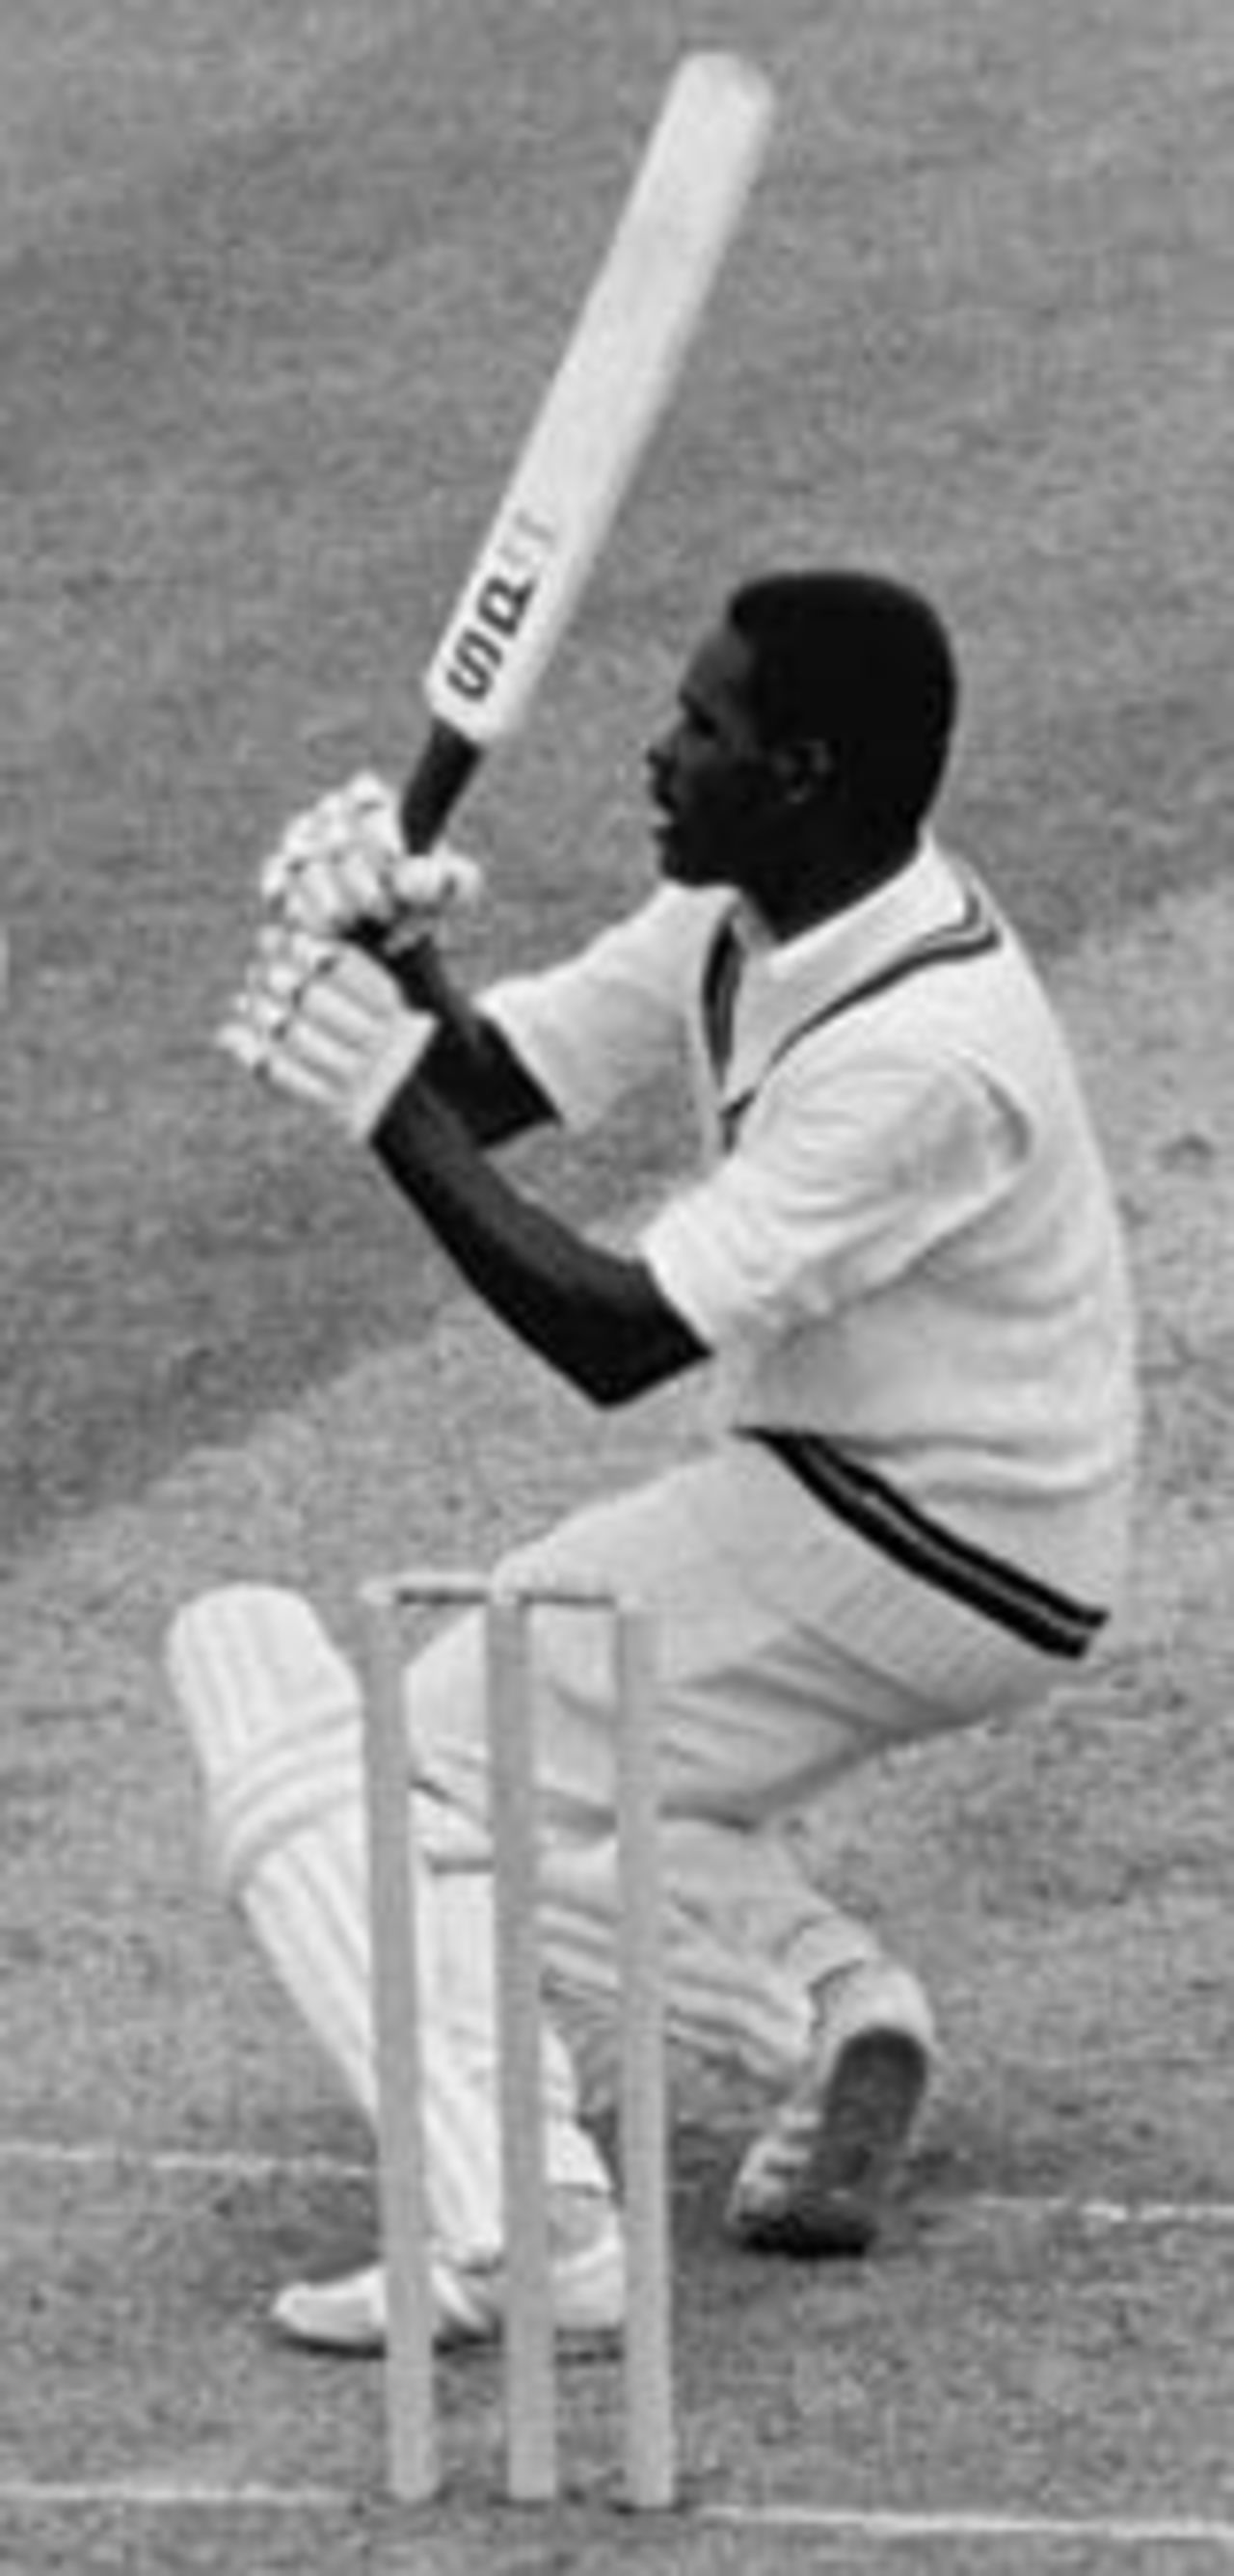 Collis King, England v West Indies, Prudential Cup final, Lord's, June 23, 1979